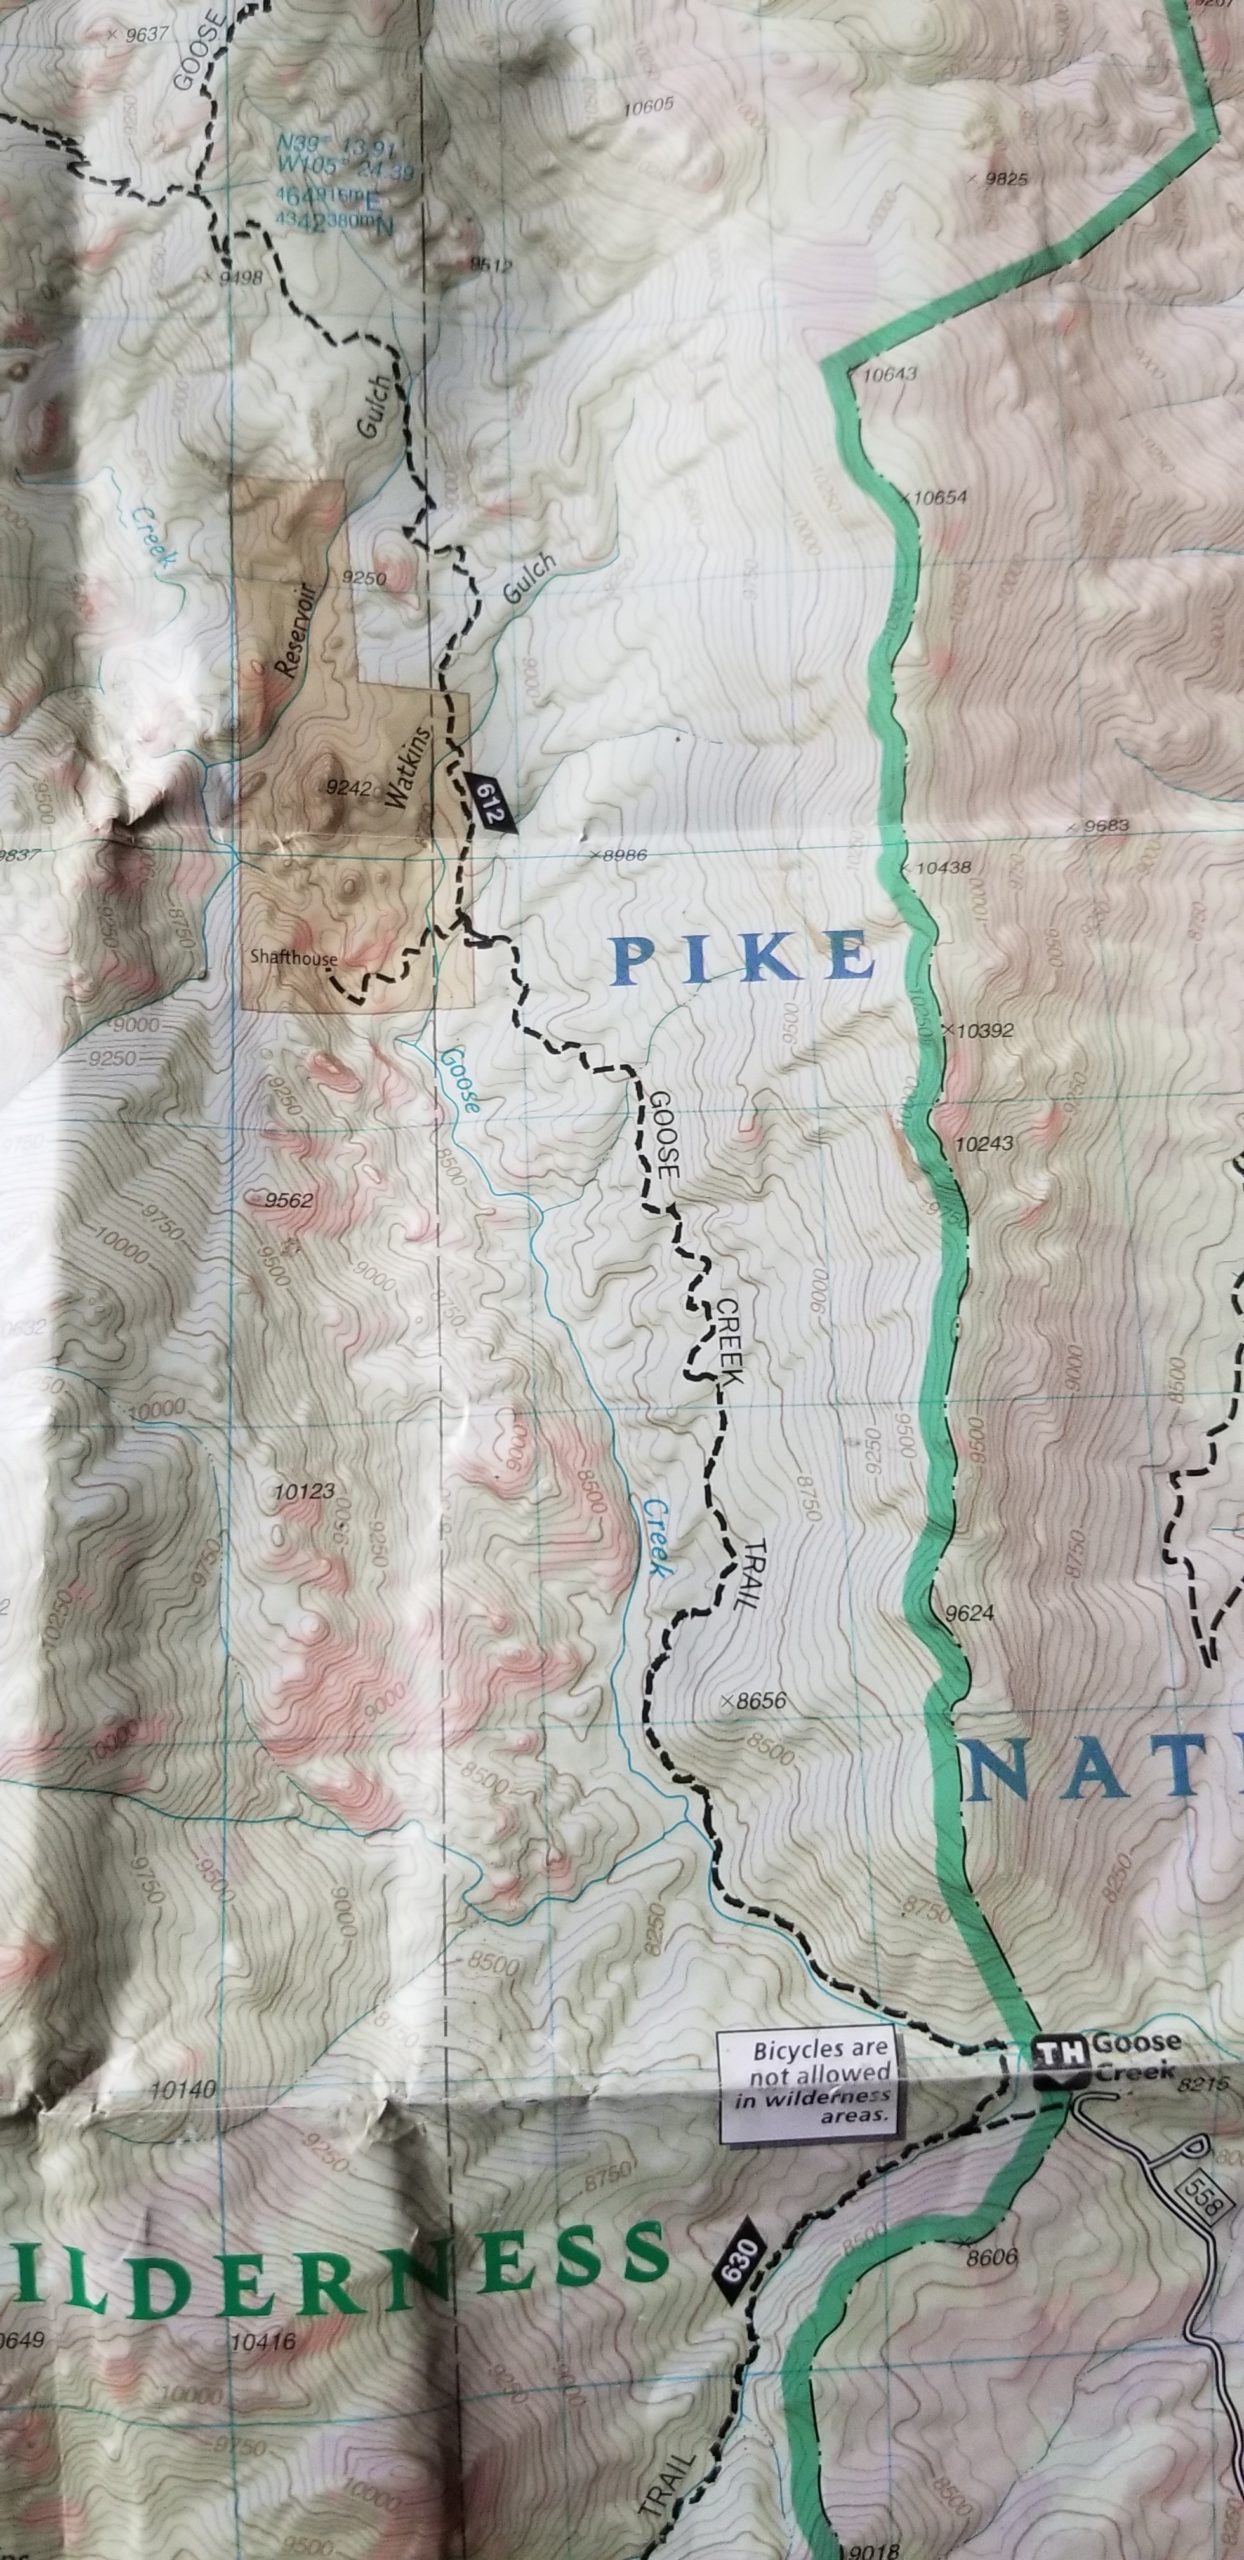 A topographic map shows the trail to the old cabins in Lost Creek Wilderness.